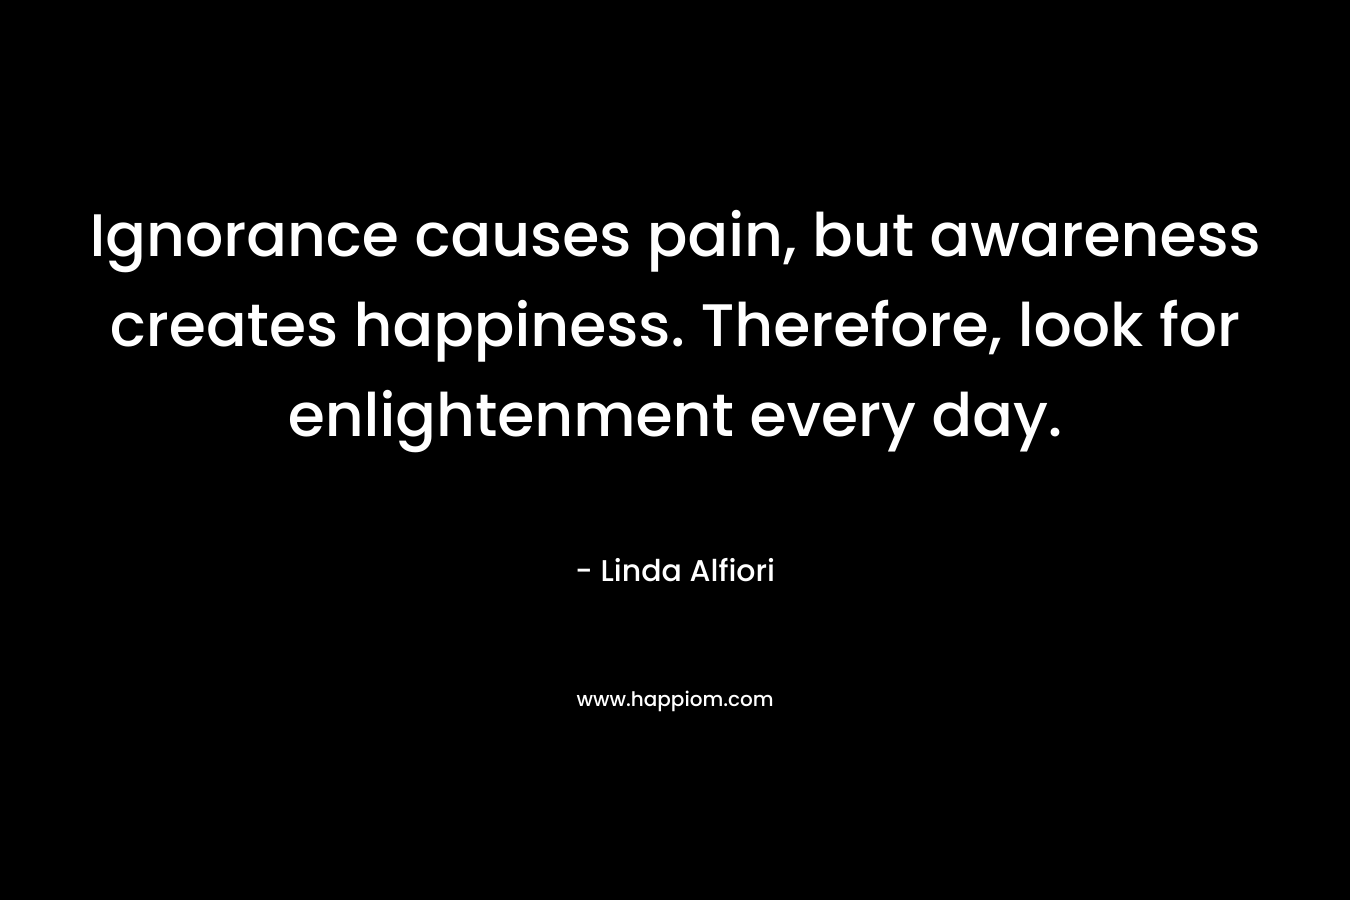 Ignorance causes pain, but awareness creates happiness. Therefore, look for enlightenment every day.